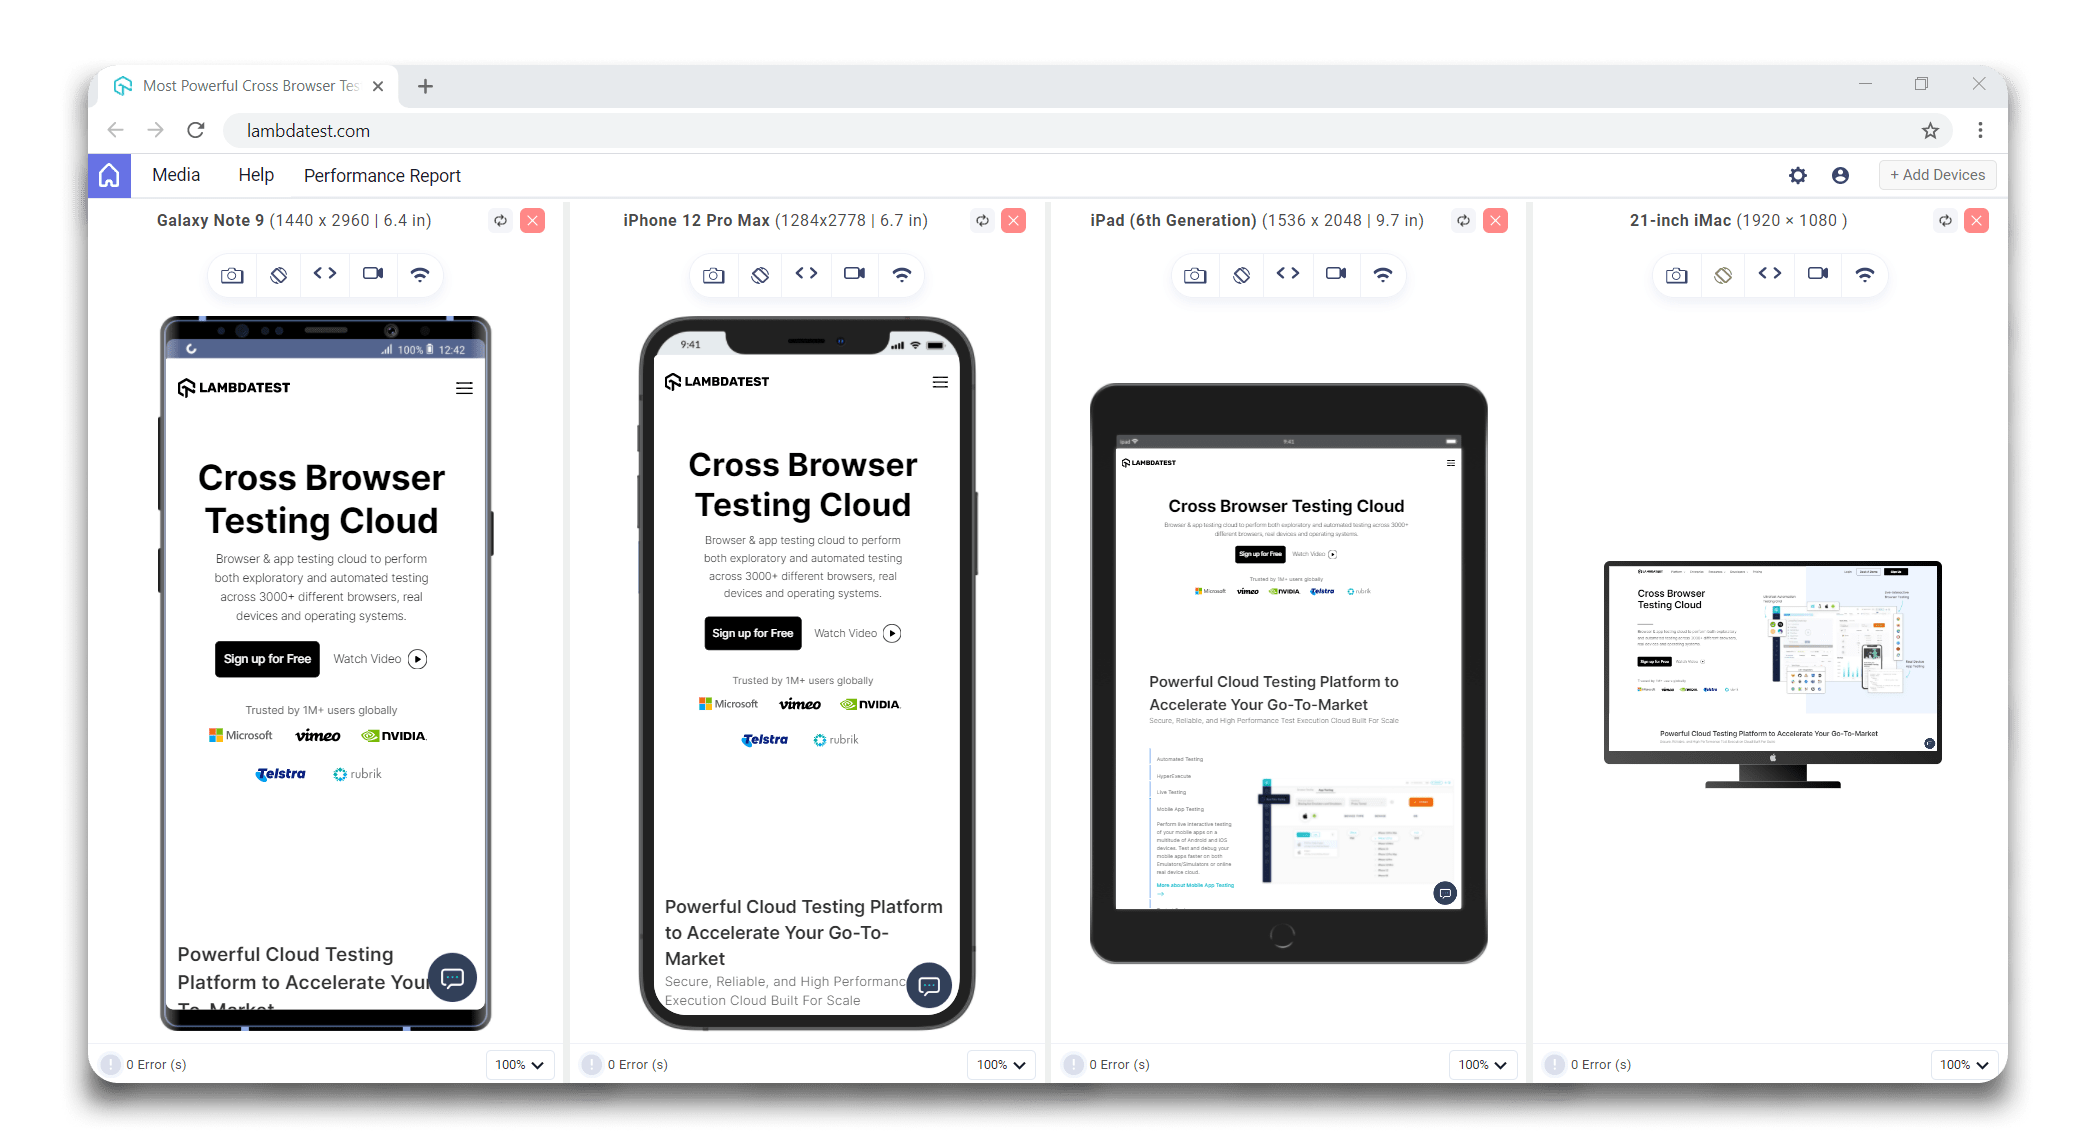 Interact and Test With More Devices